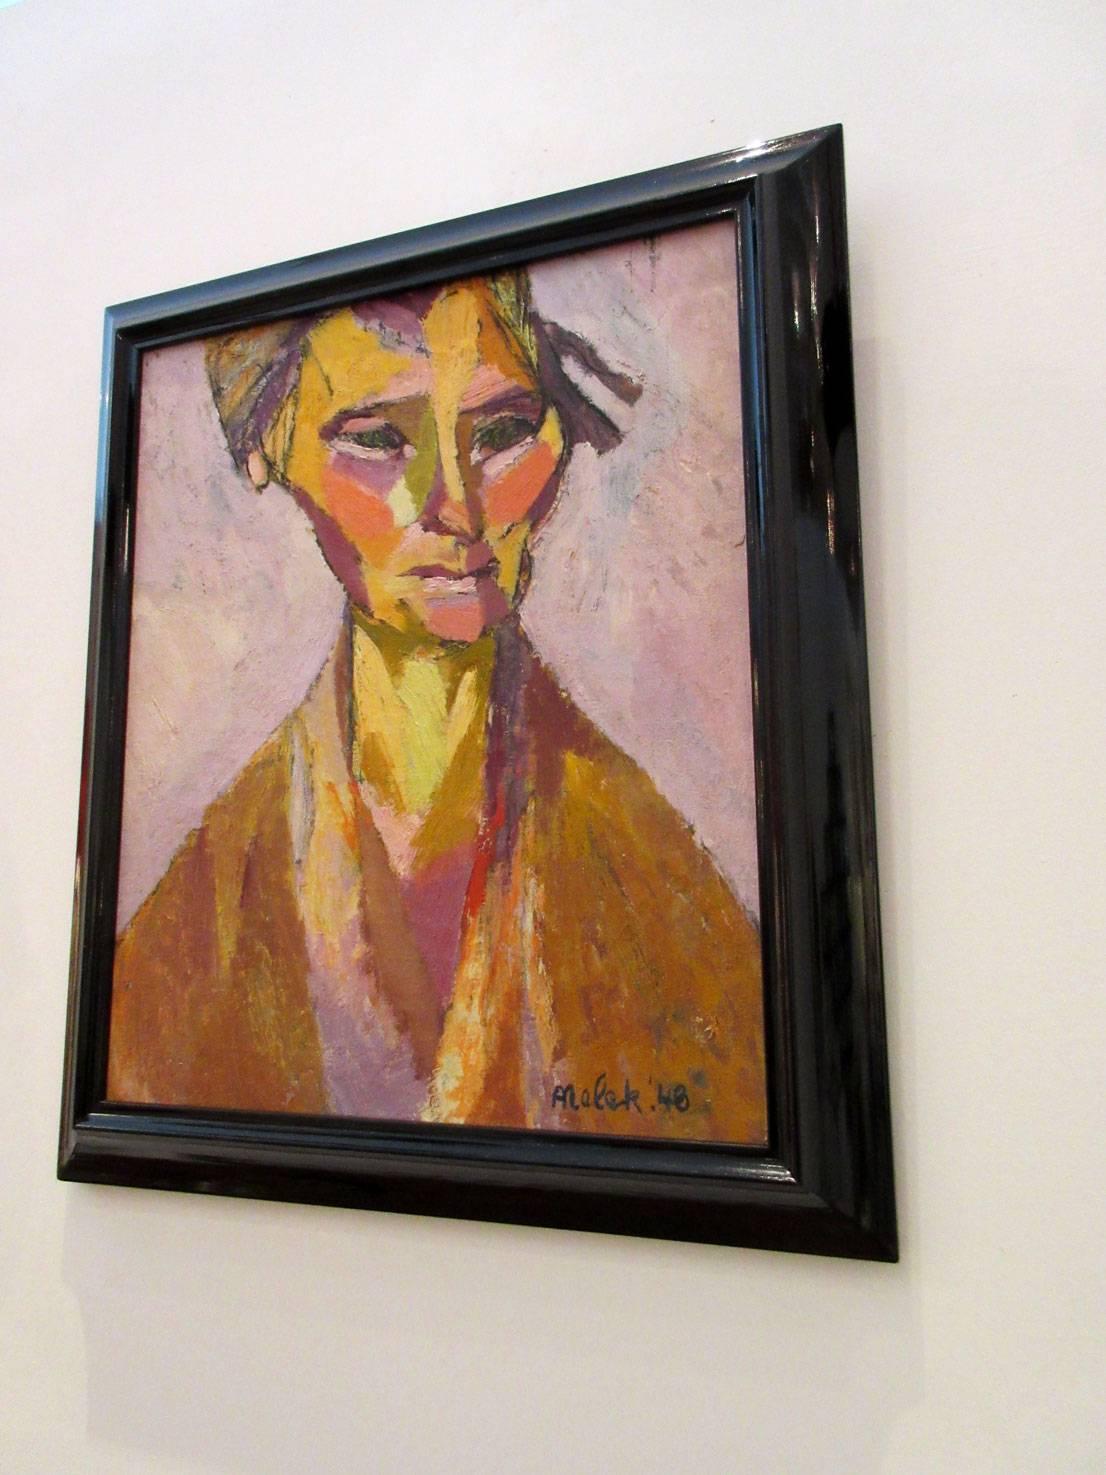 Newly framed oil on canvas portrait of a woman. The French artist Annelies Nelck was an assistant and model for Henri Mattise. She was born: 1925, died: 2014. The painting is signed and dated "48".